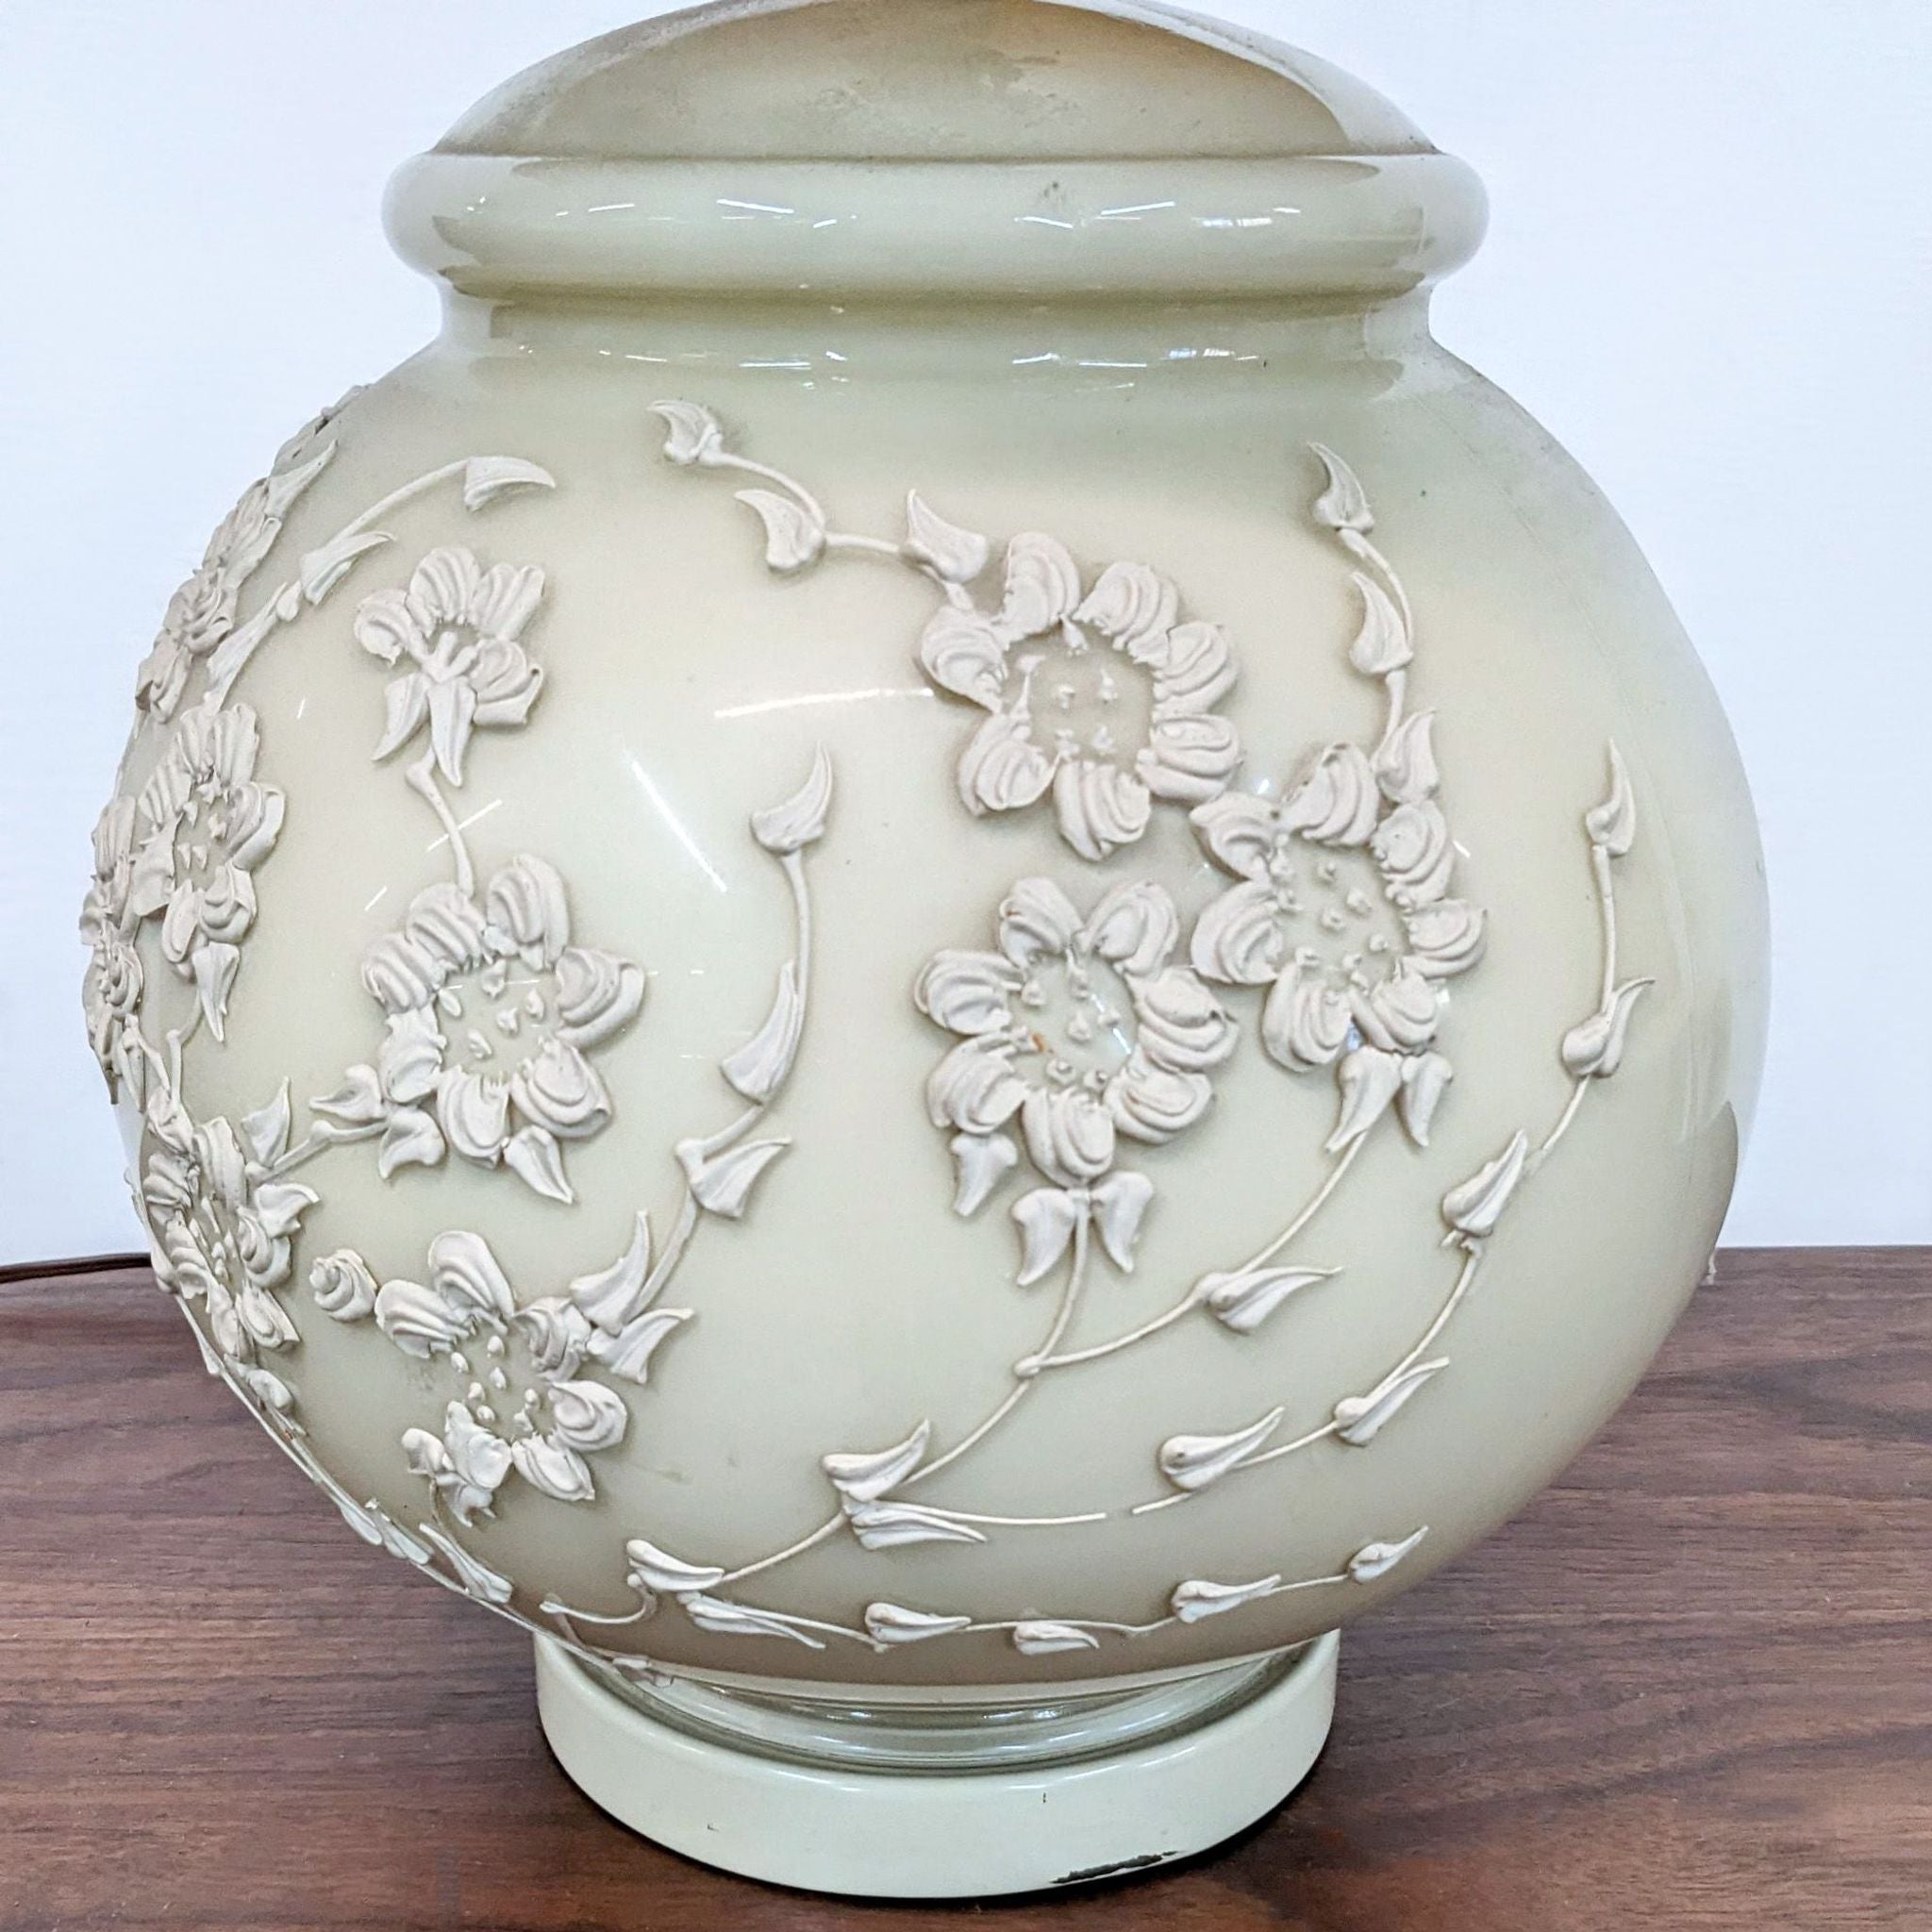 Alt text 2: Close-up of a Reperch floral embossed lamp base in cream, showcasing detailed flower and vine textures.